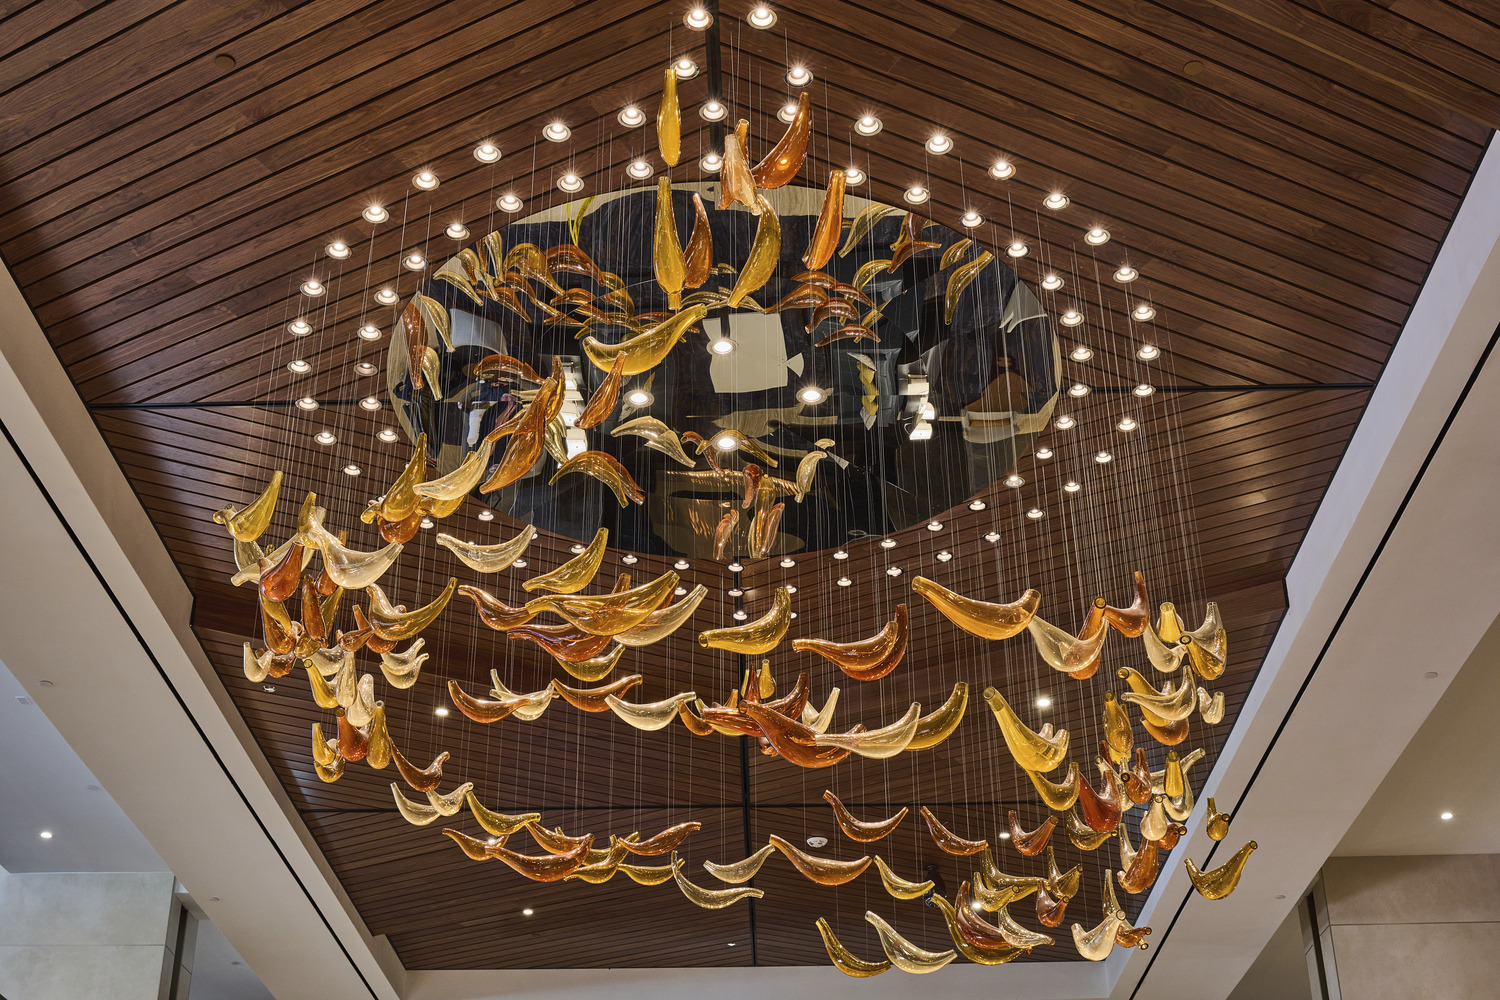 A chandelier with glass pieces from the ceiling.